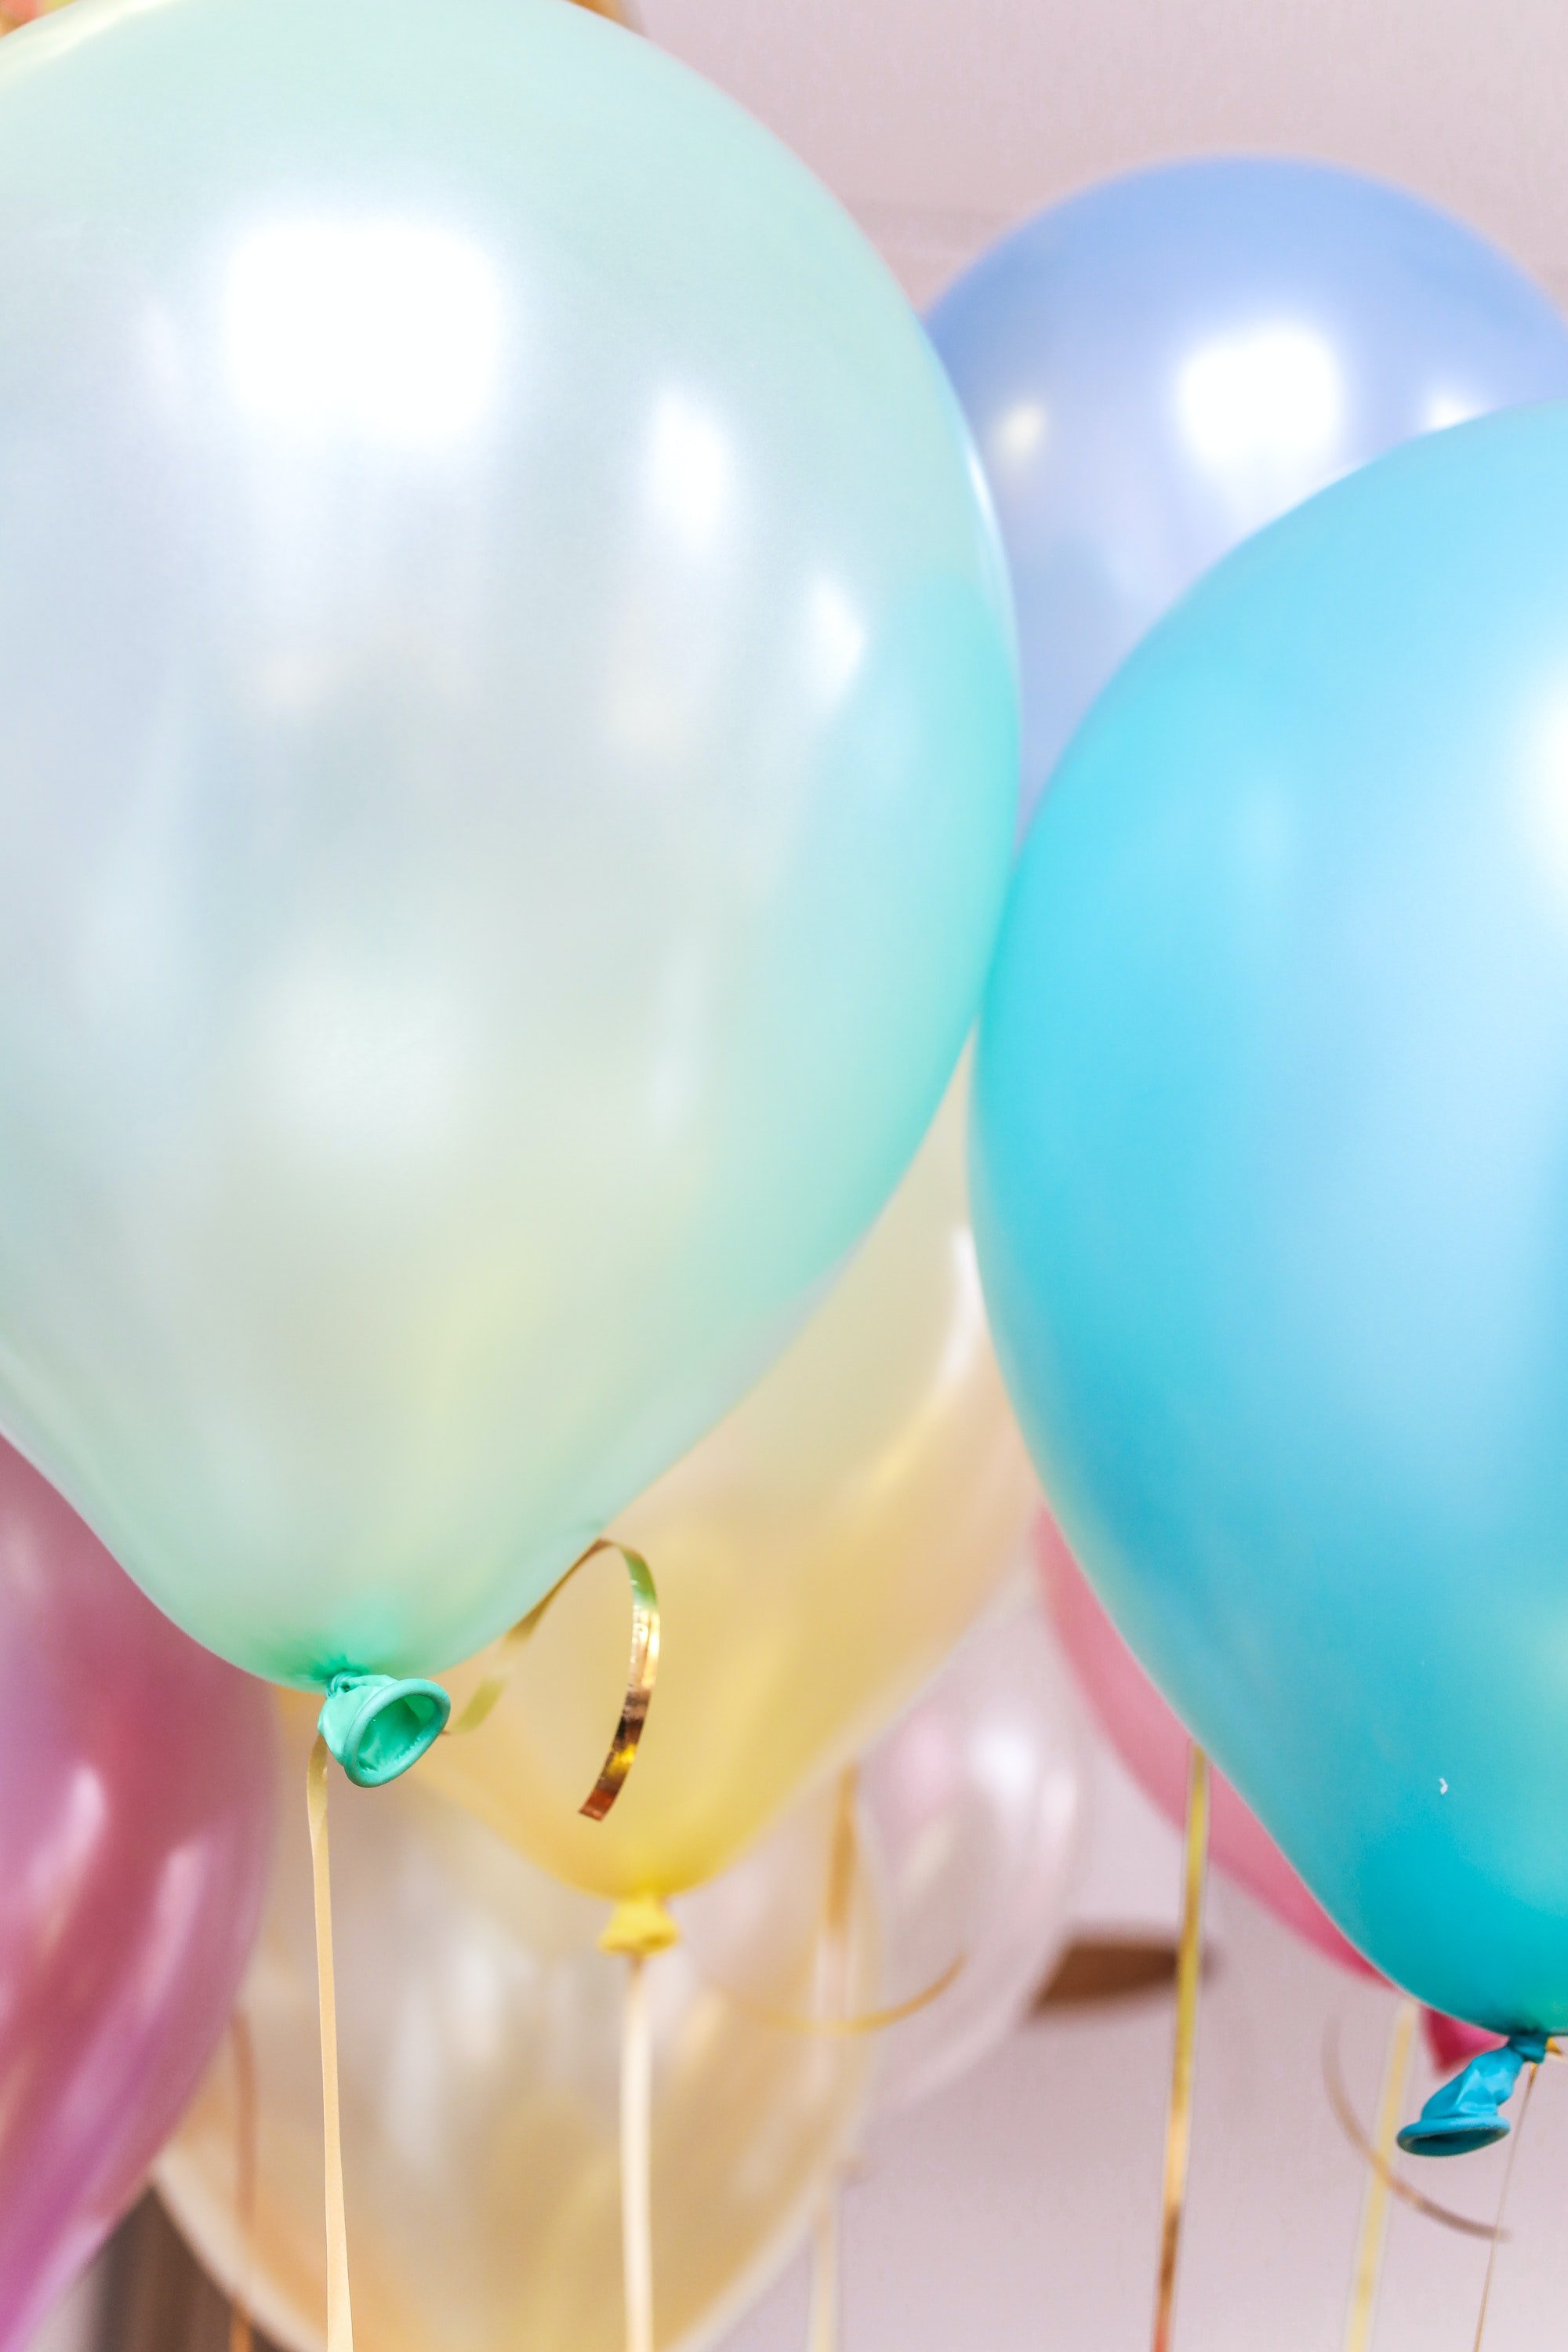 The living room was decorated with balloons, streamers, and basketball paraphernalia. | Source: Pexels